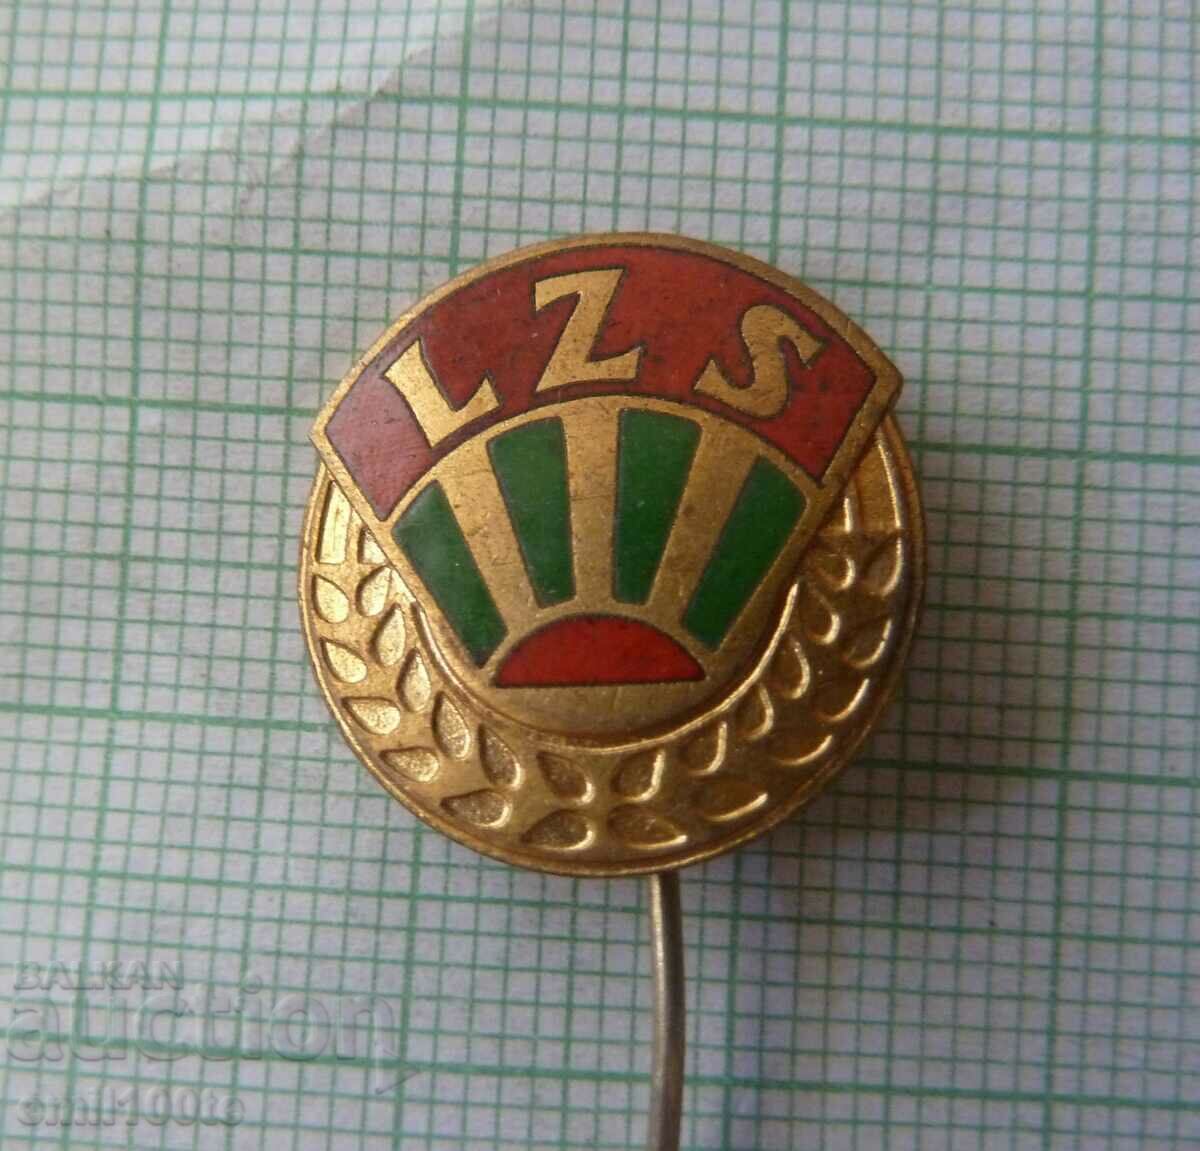 Badge - LZS Organization of Rural Sports Clubs in Poland